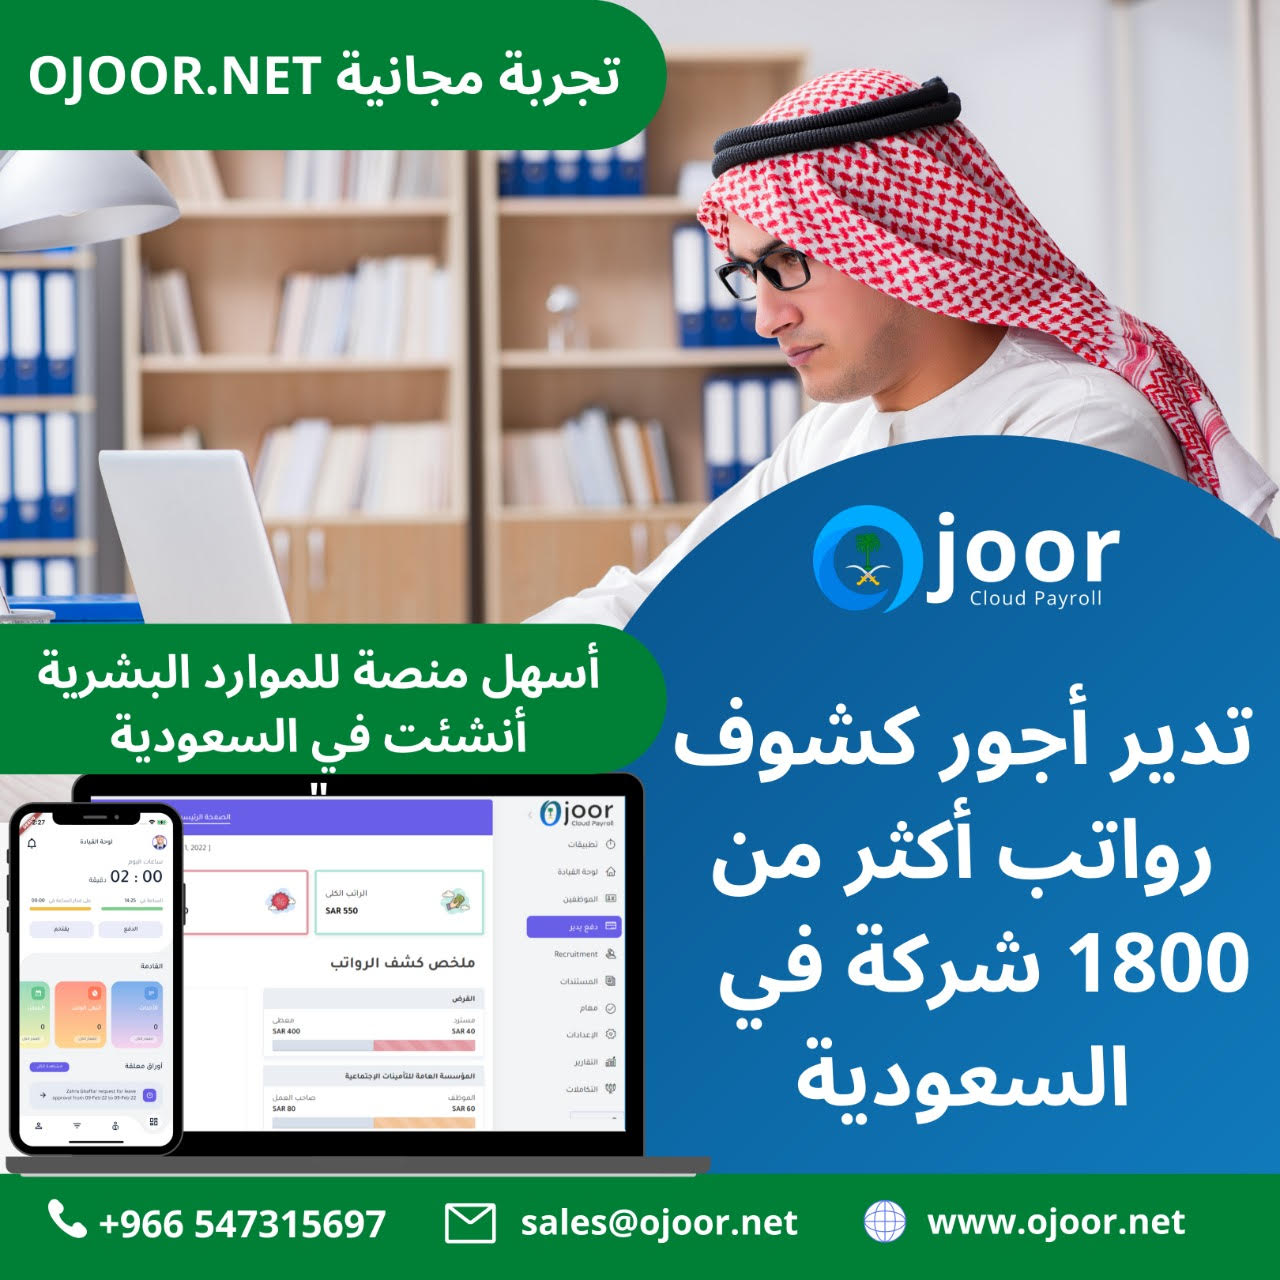 Which are the Tips For Choosing The Right Payroll System in Saudi?